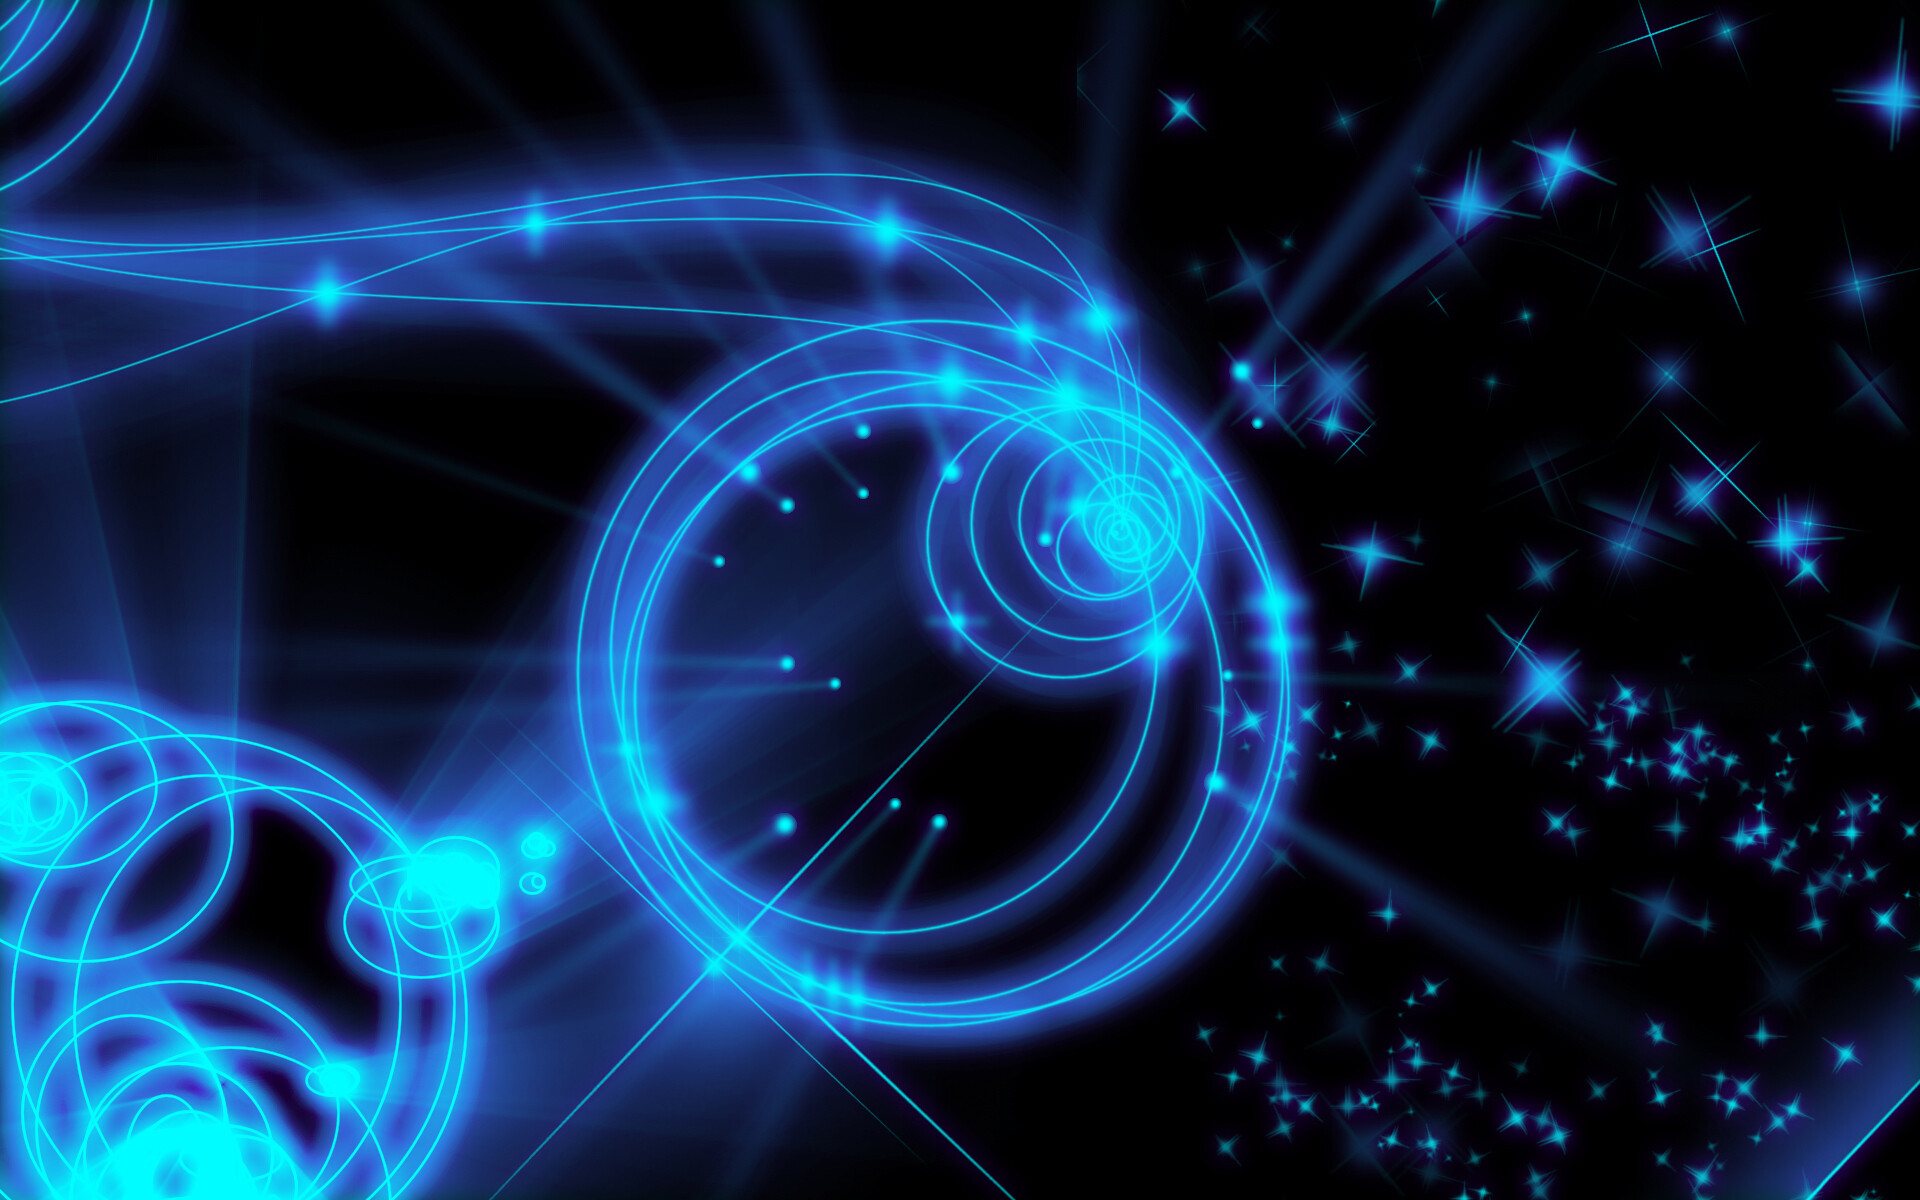 Glow in the Dark: Visual effects, Neon astronomical objects, Abstract circles. 1920x1200 HD Wallpaper.